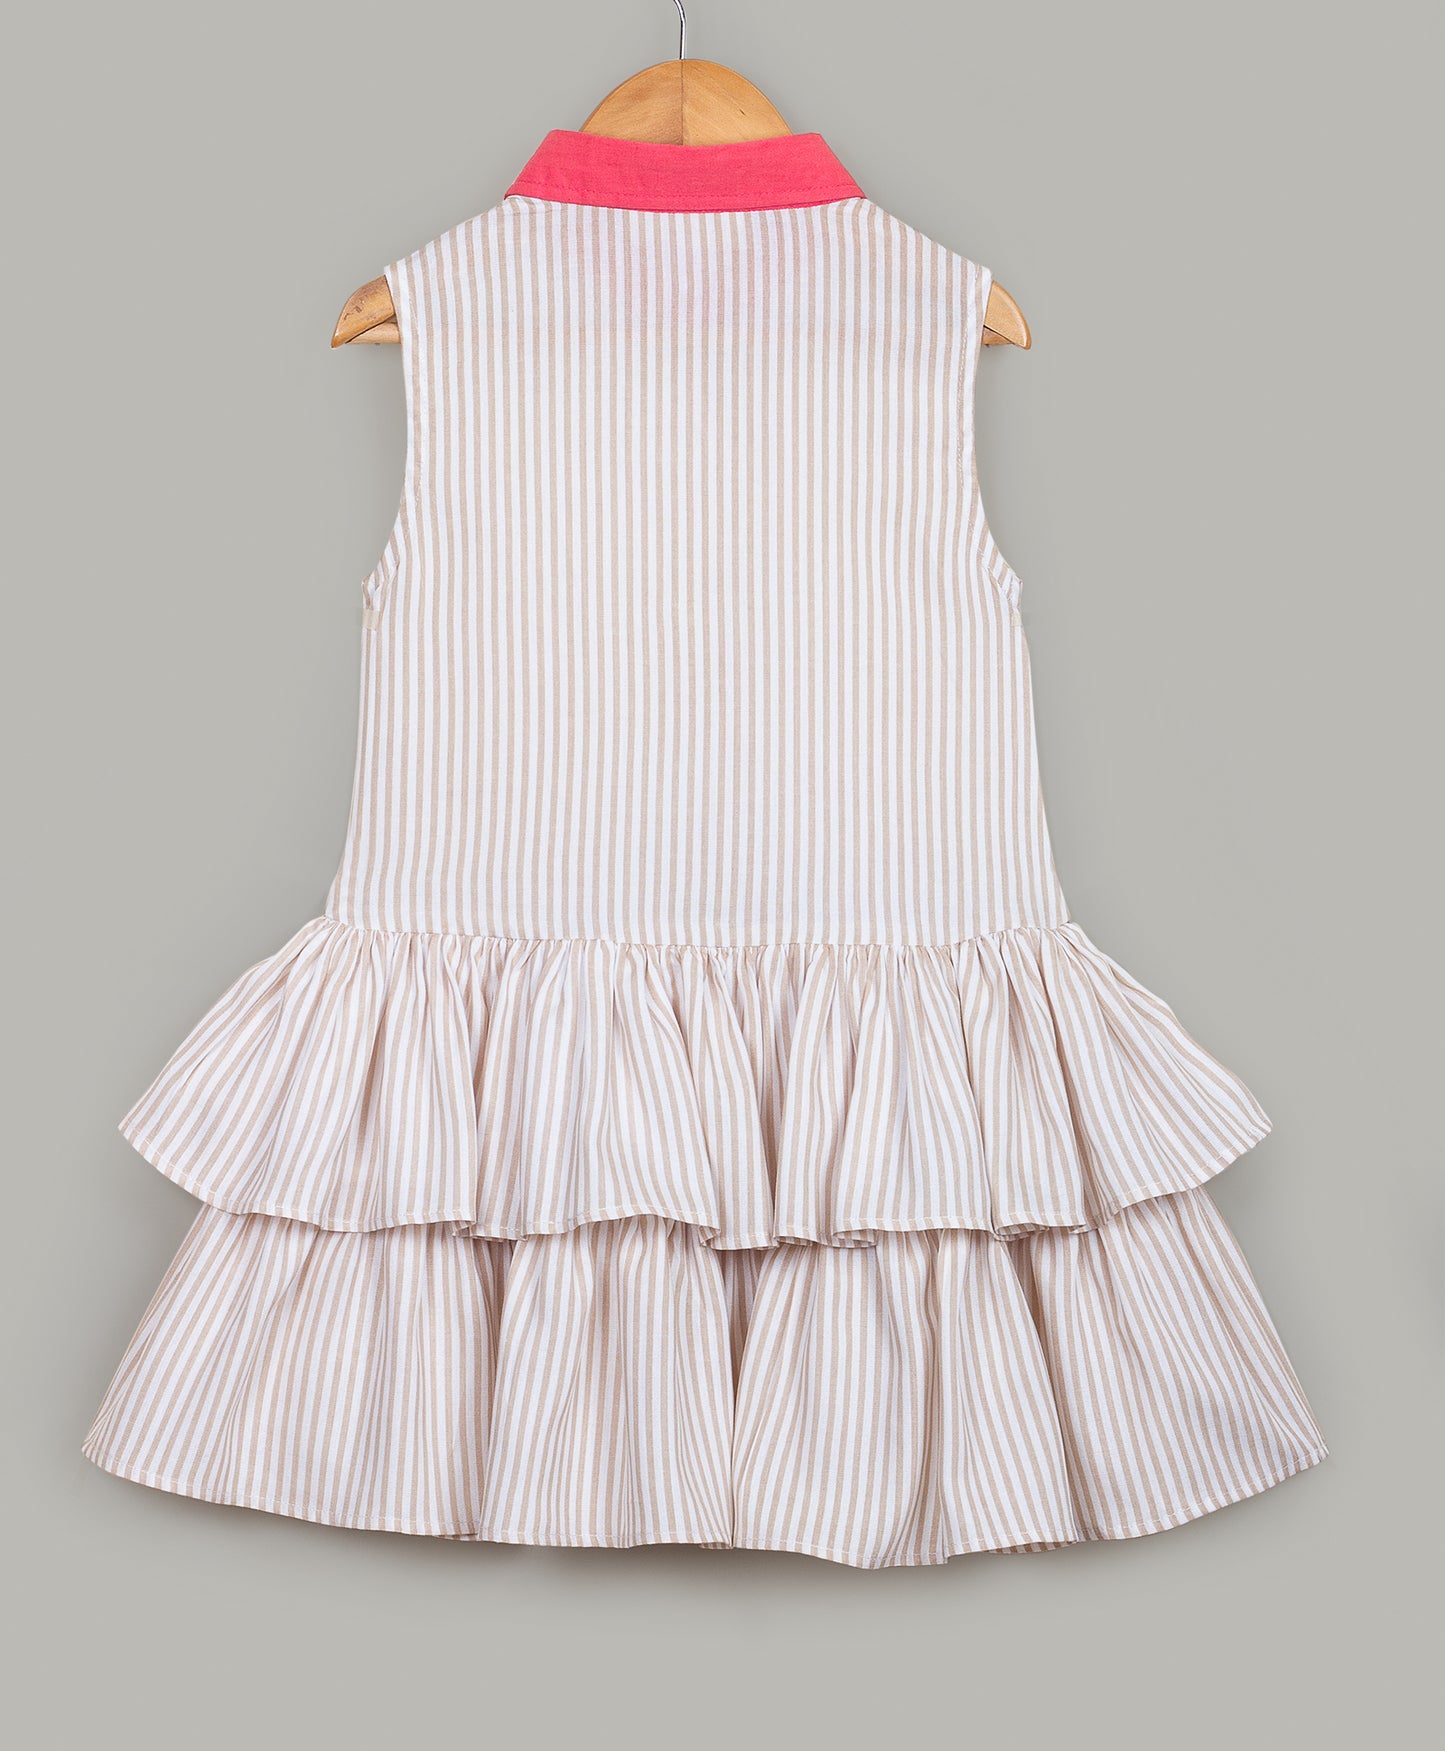 Beige Stripe print dress with contrast collars  and frills at flounce